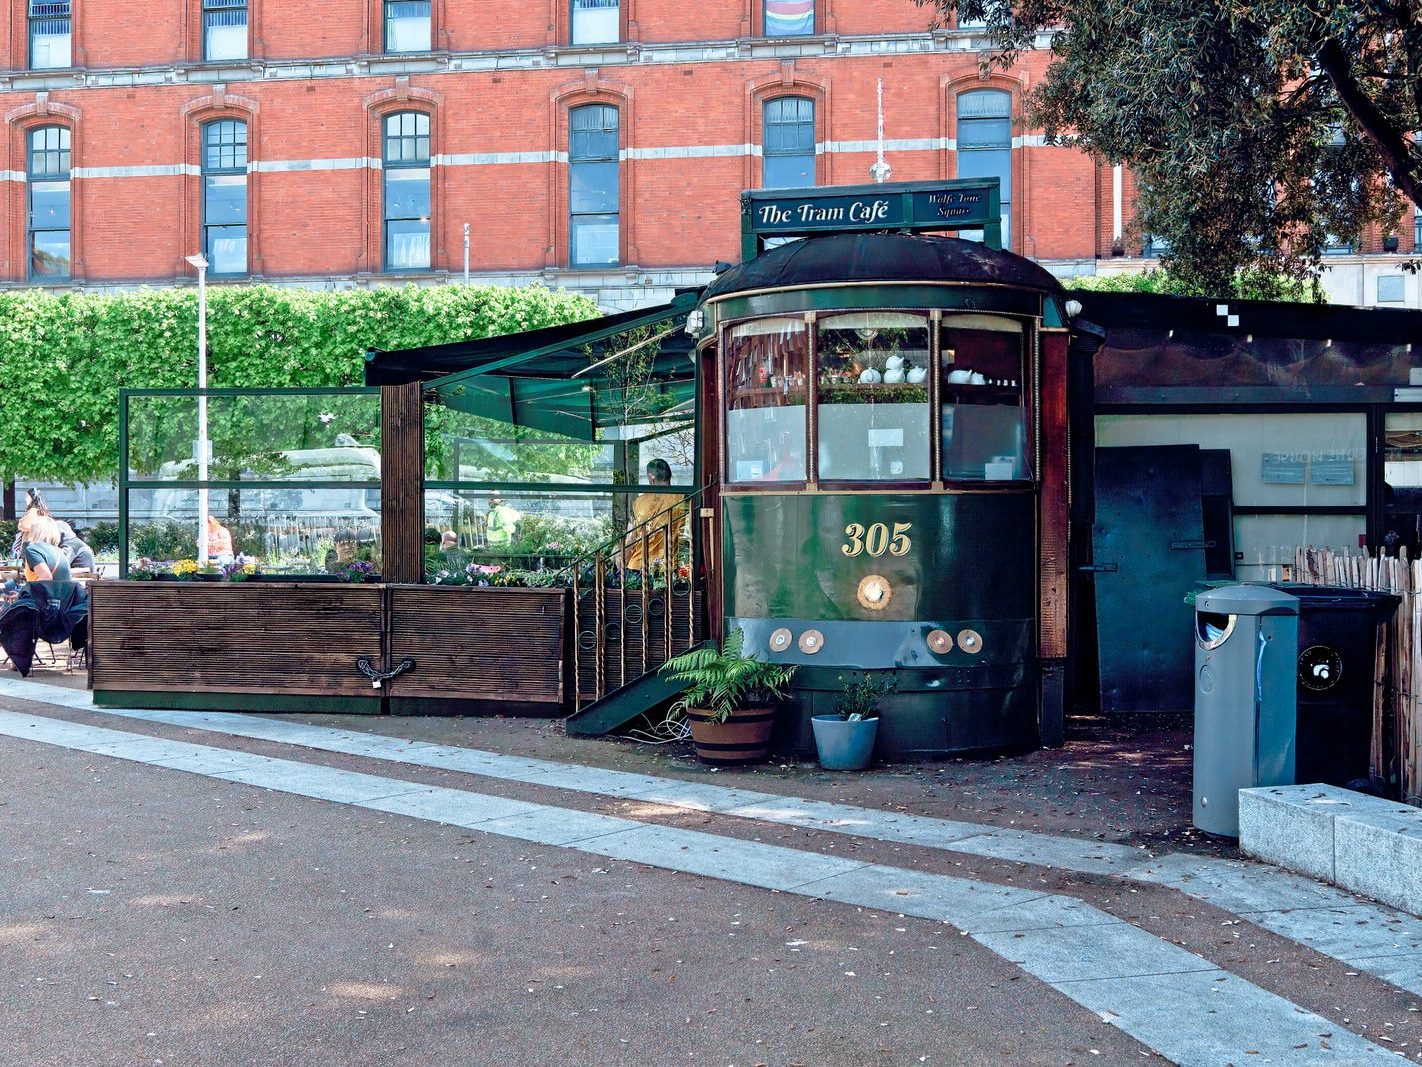 WOLFE TONE PARK [FEATURING TRAM 305 WHICH IS NOW A POPULAR CAFE] 009